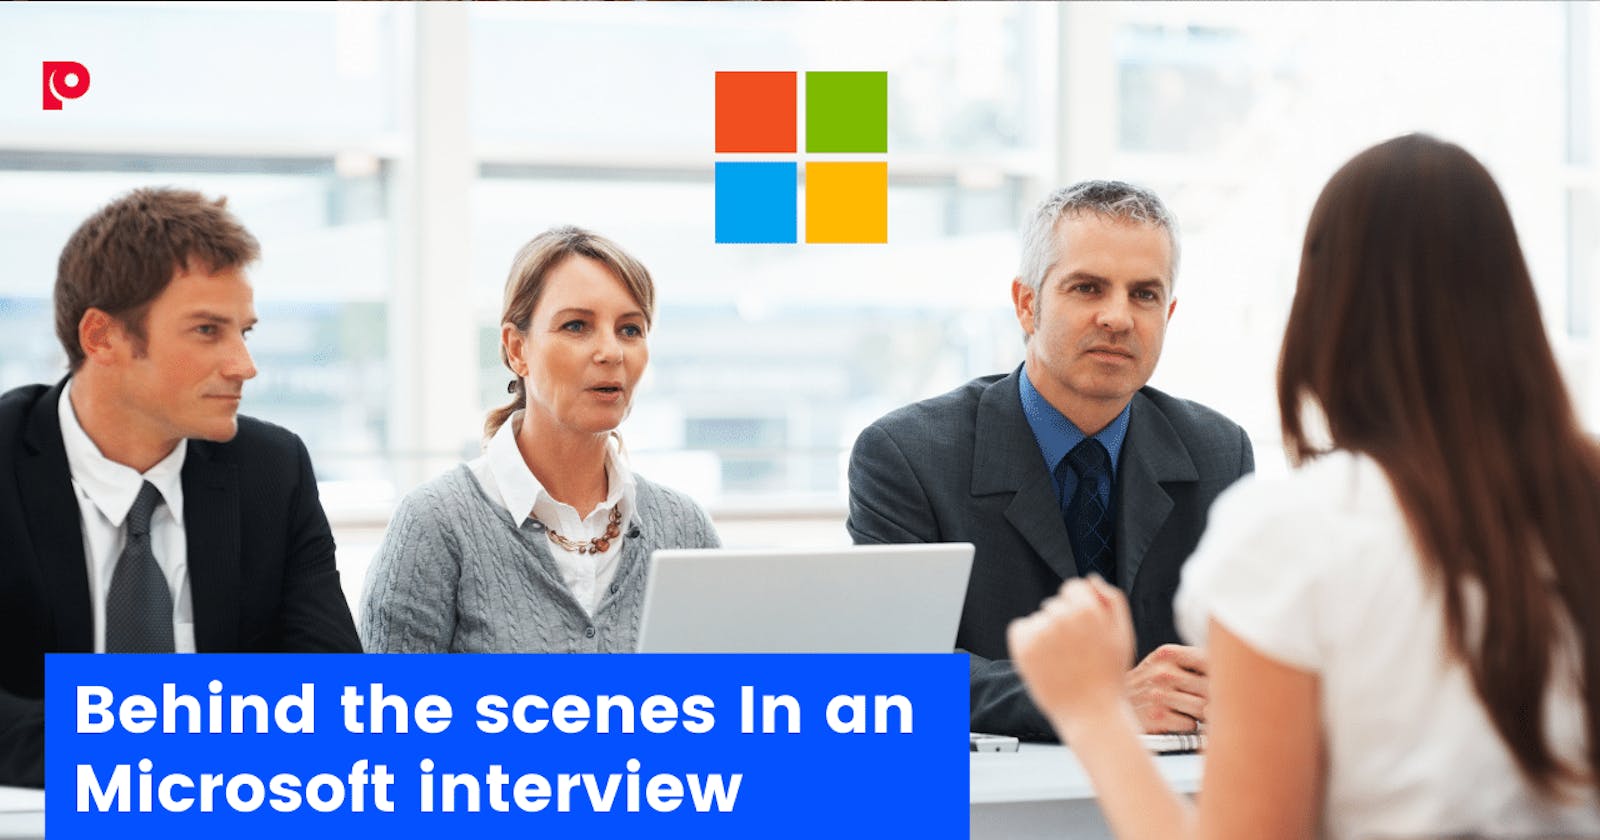 What really happens behind the scenes in an Microsoft interview?